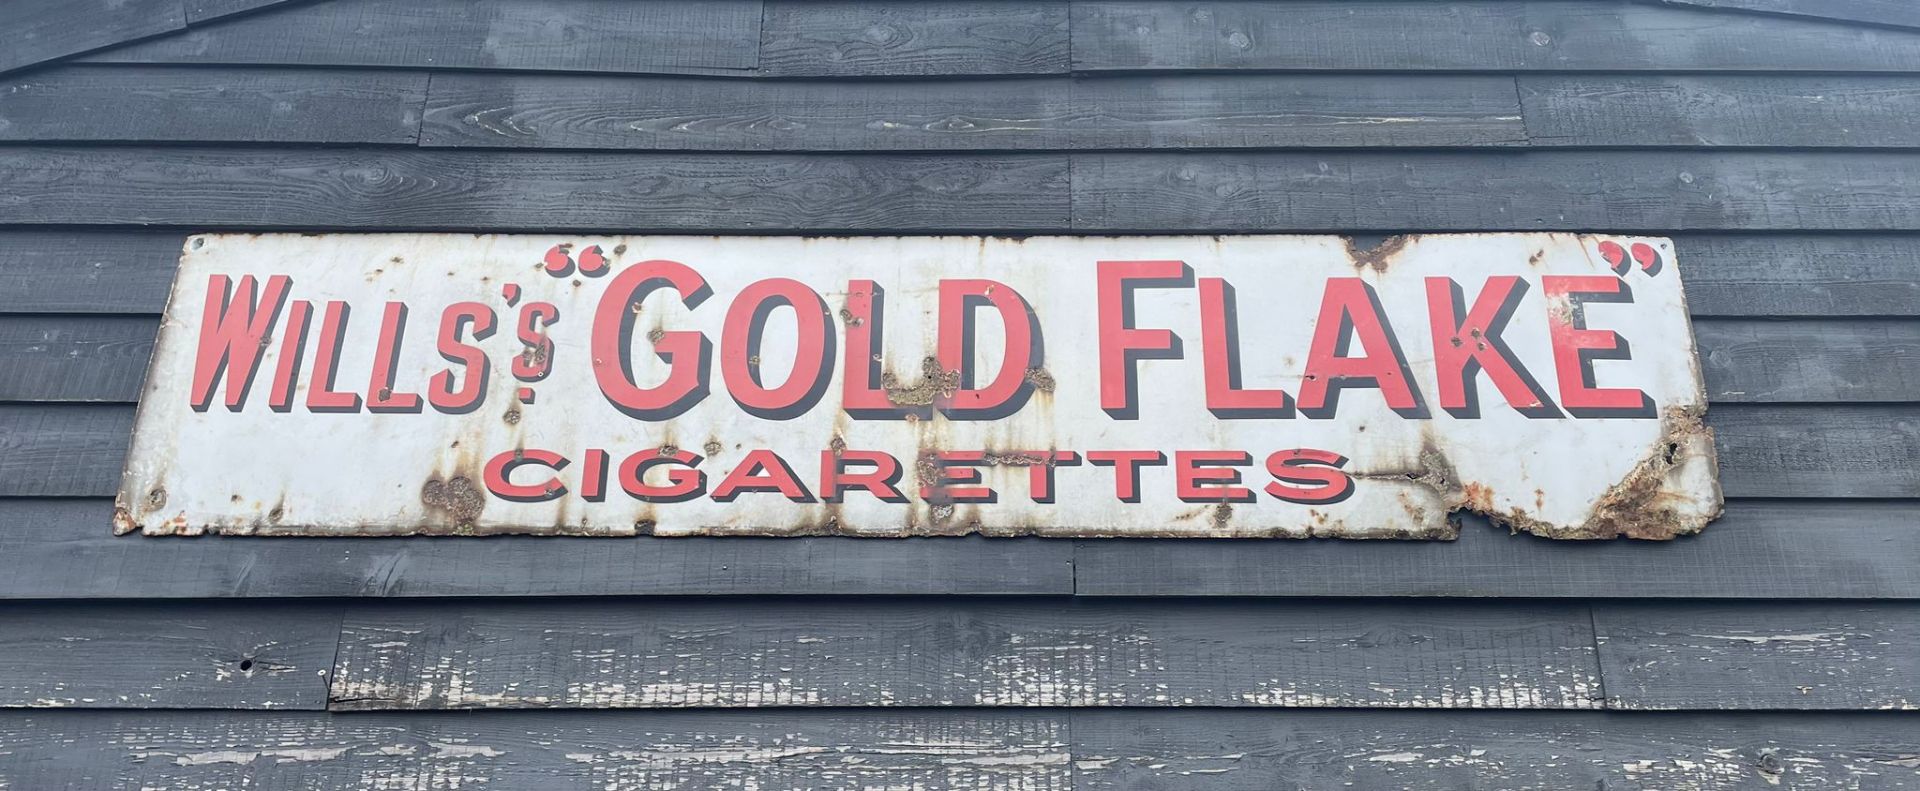 wills Gold Flake Cigarettes Sign - Image 4 of 5